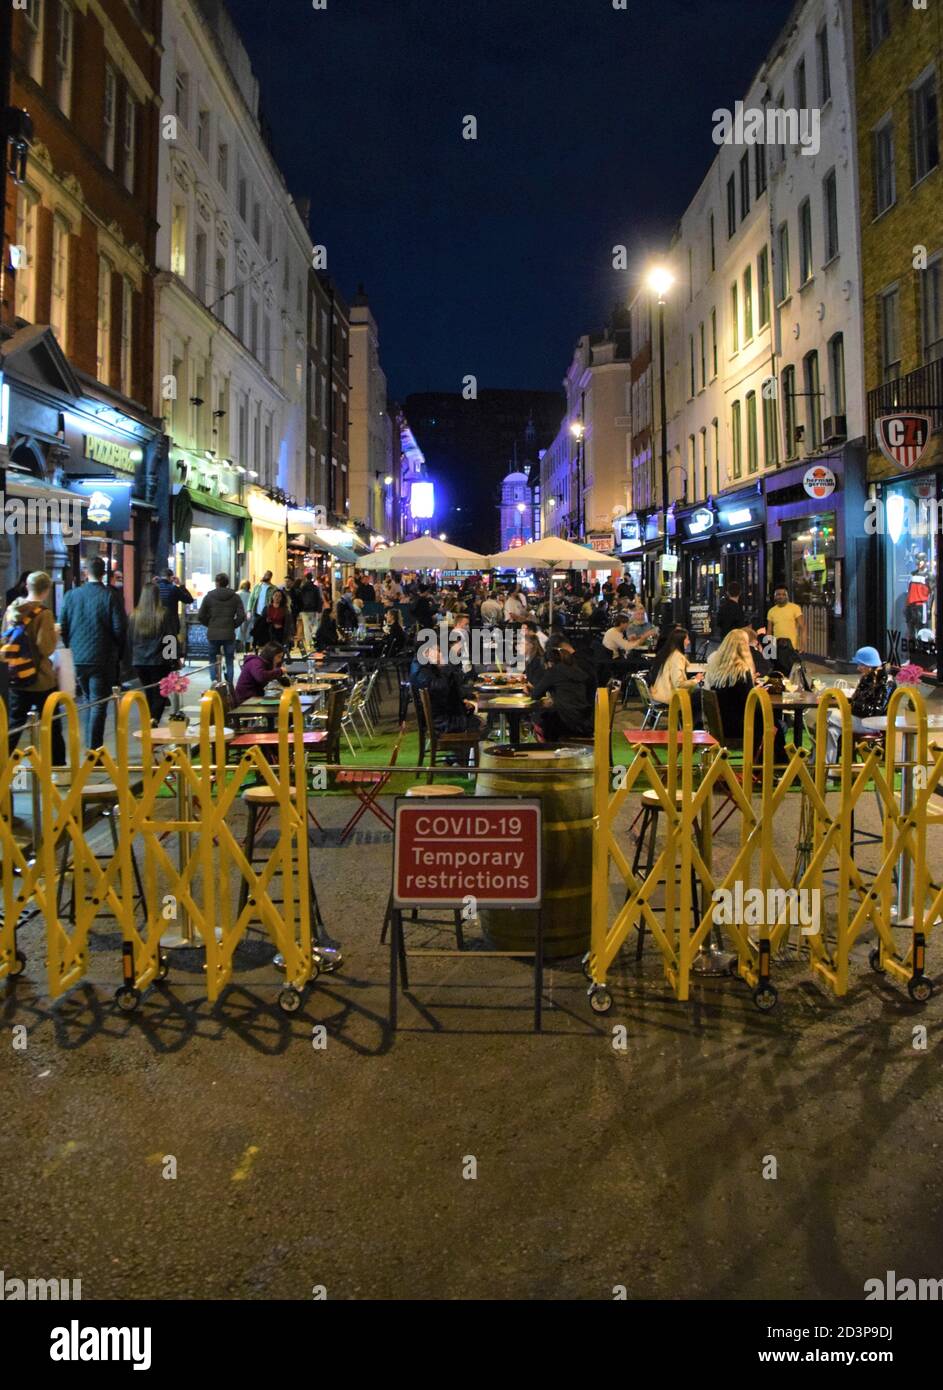 Crowd of people at night on Old Compton Street with Covid-19 traffic restriction sign, Soho, London 2020. Sections of Soho have been blocked for traffic to allow temporary outdoor street seating for bars and restaurants to facilitate social distancing during the pandemic. Stock Photo